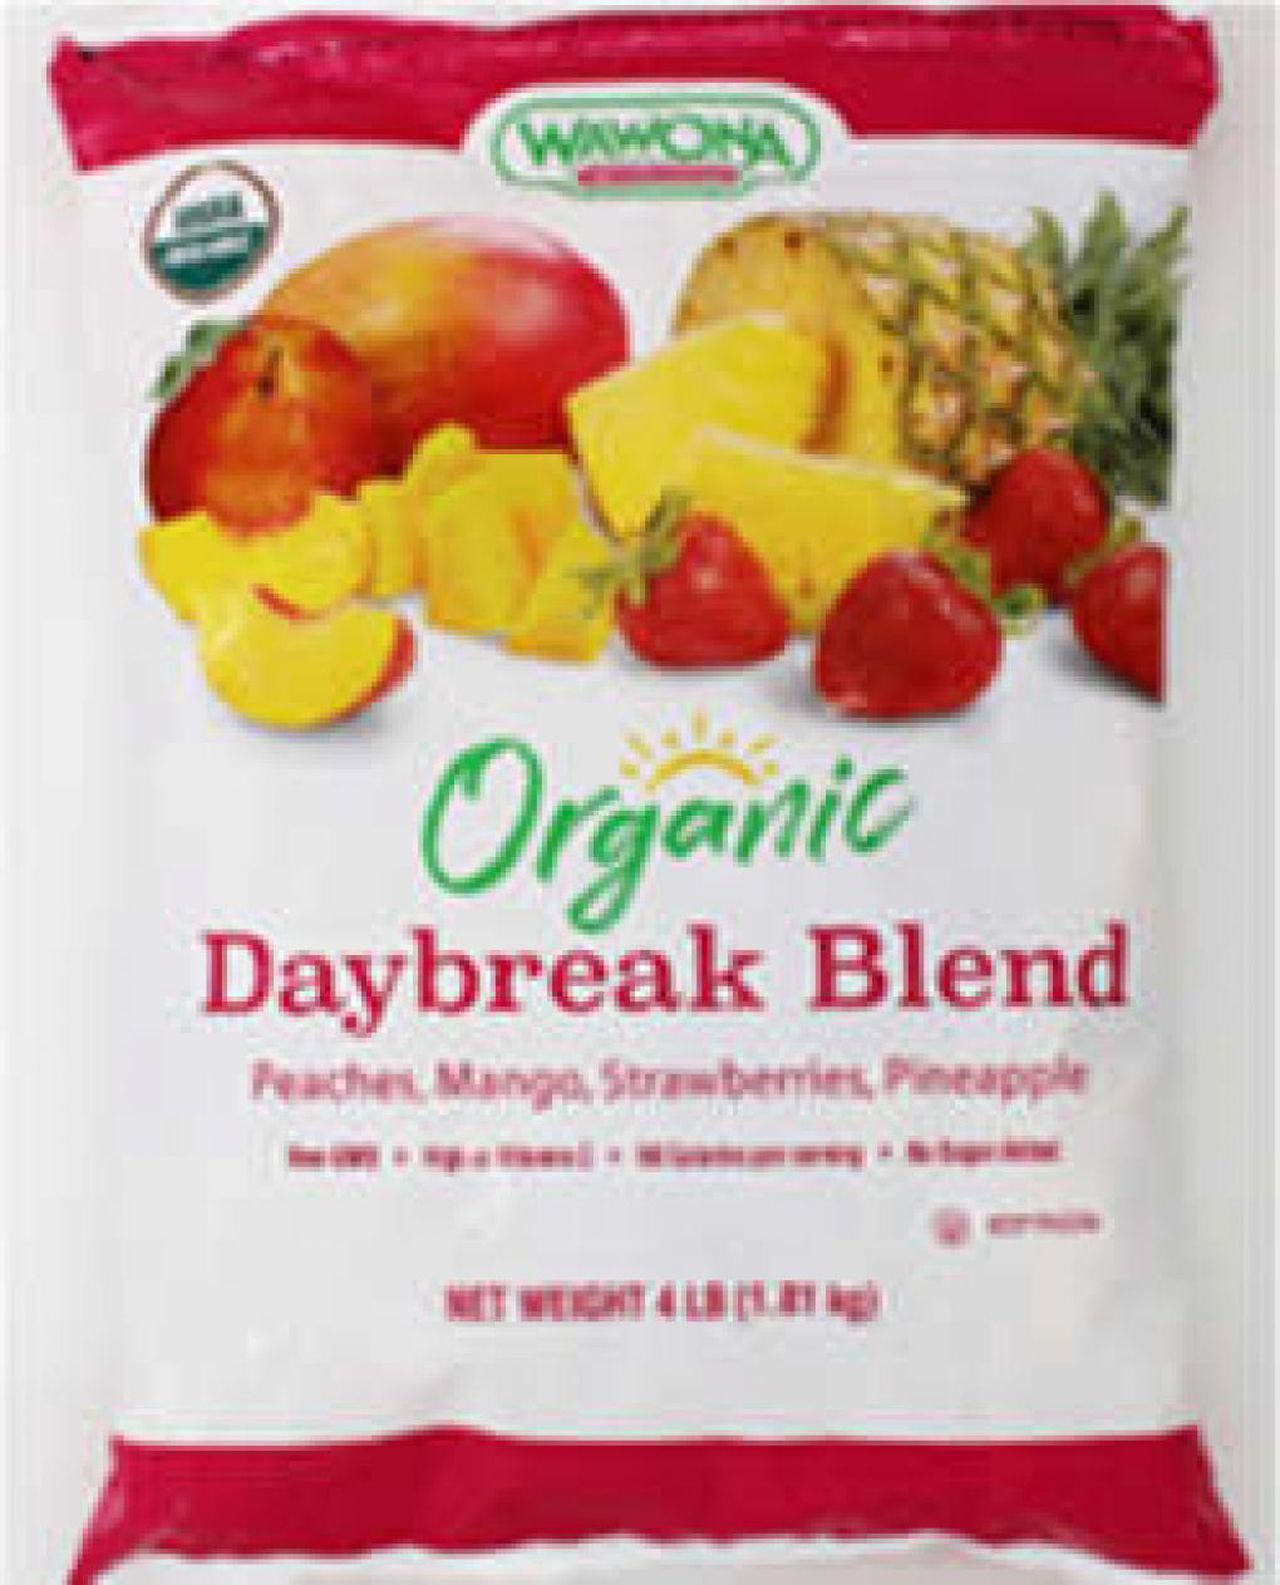 Wawona Frozen Foods has recalled packages of its Organic DayBreak Blend frozen fruit as a cautionary move over concerns of Hepatitis A contamination, according to the U.S. Food and Drug Administration. There have been no illnesses associated with the product, but the packages contain strawberries grown in Mexico that have the potential for contamination.